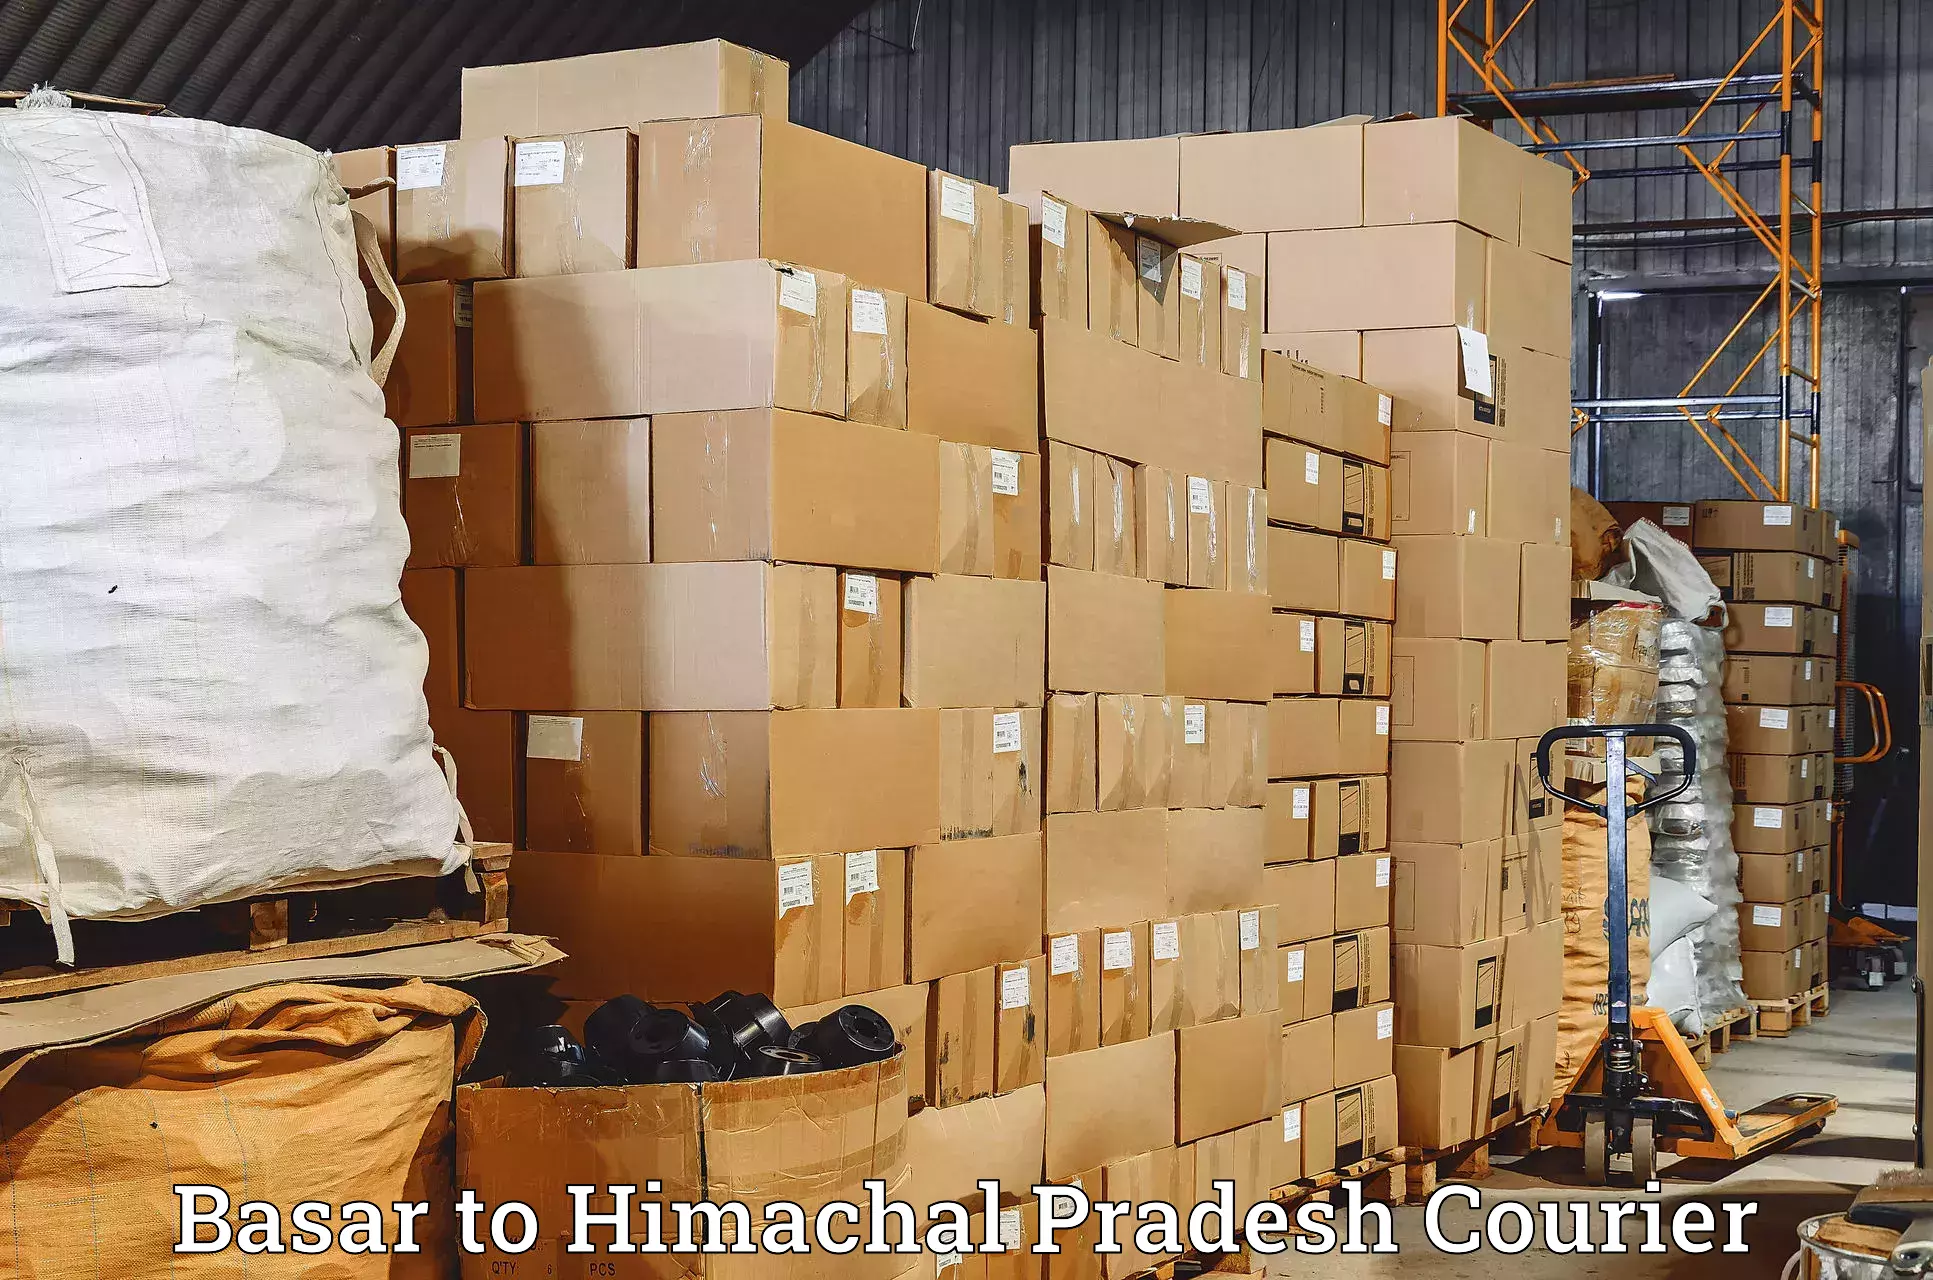 Express delivery capabilities Basar to Himachal Pradesh